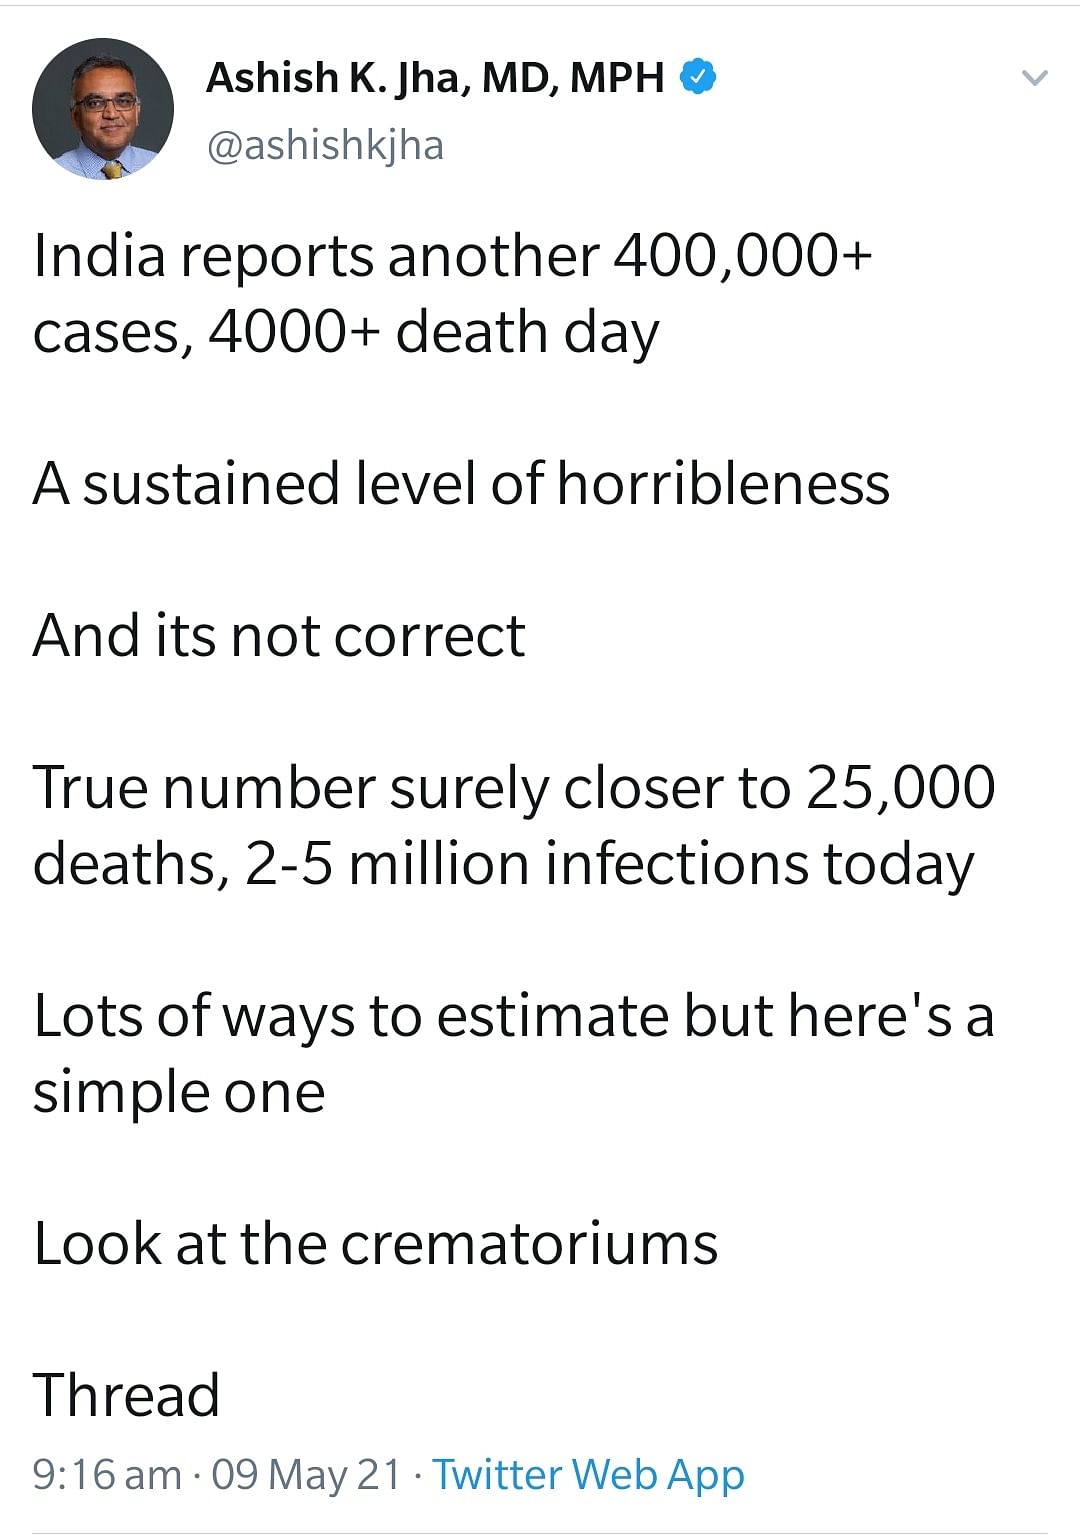 The Public health expert claims that COVID deaths in India are much higher than what the official statistics reveal.